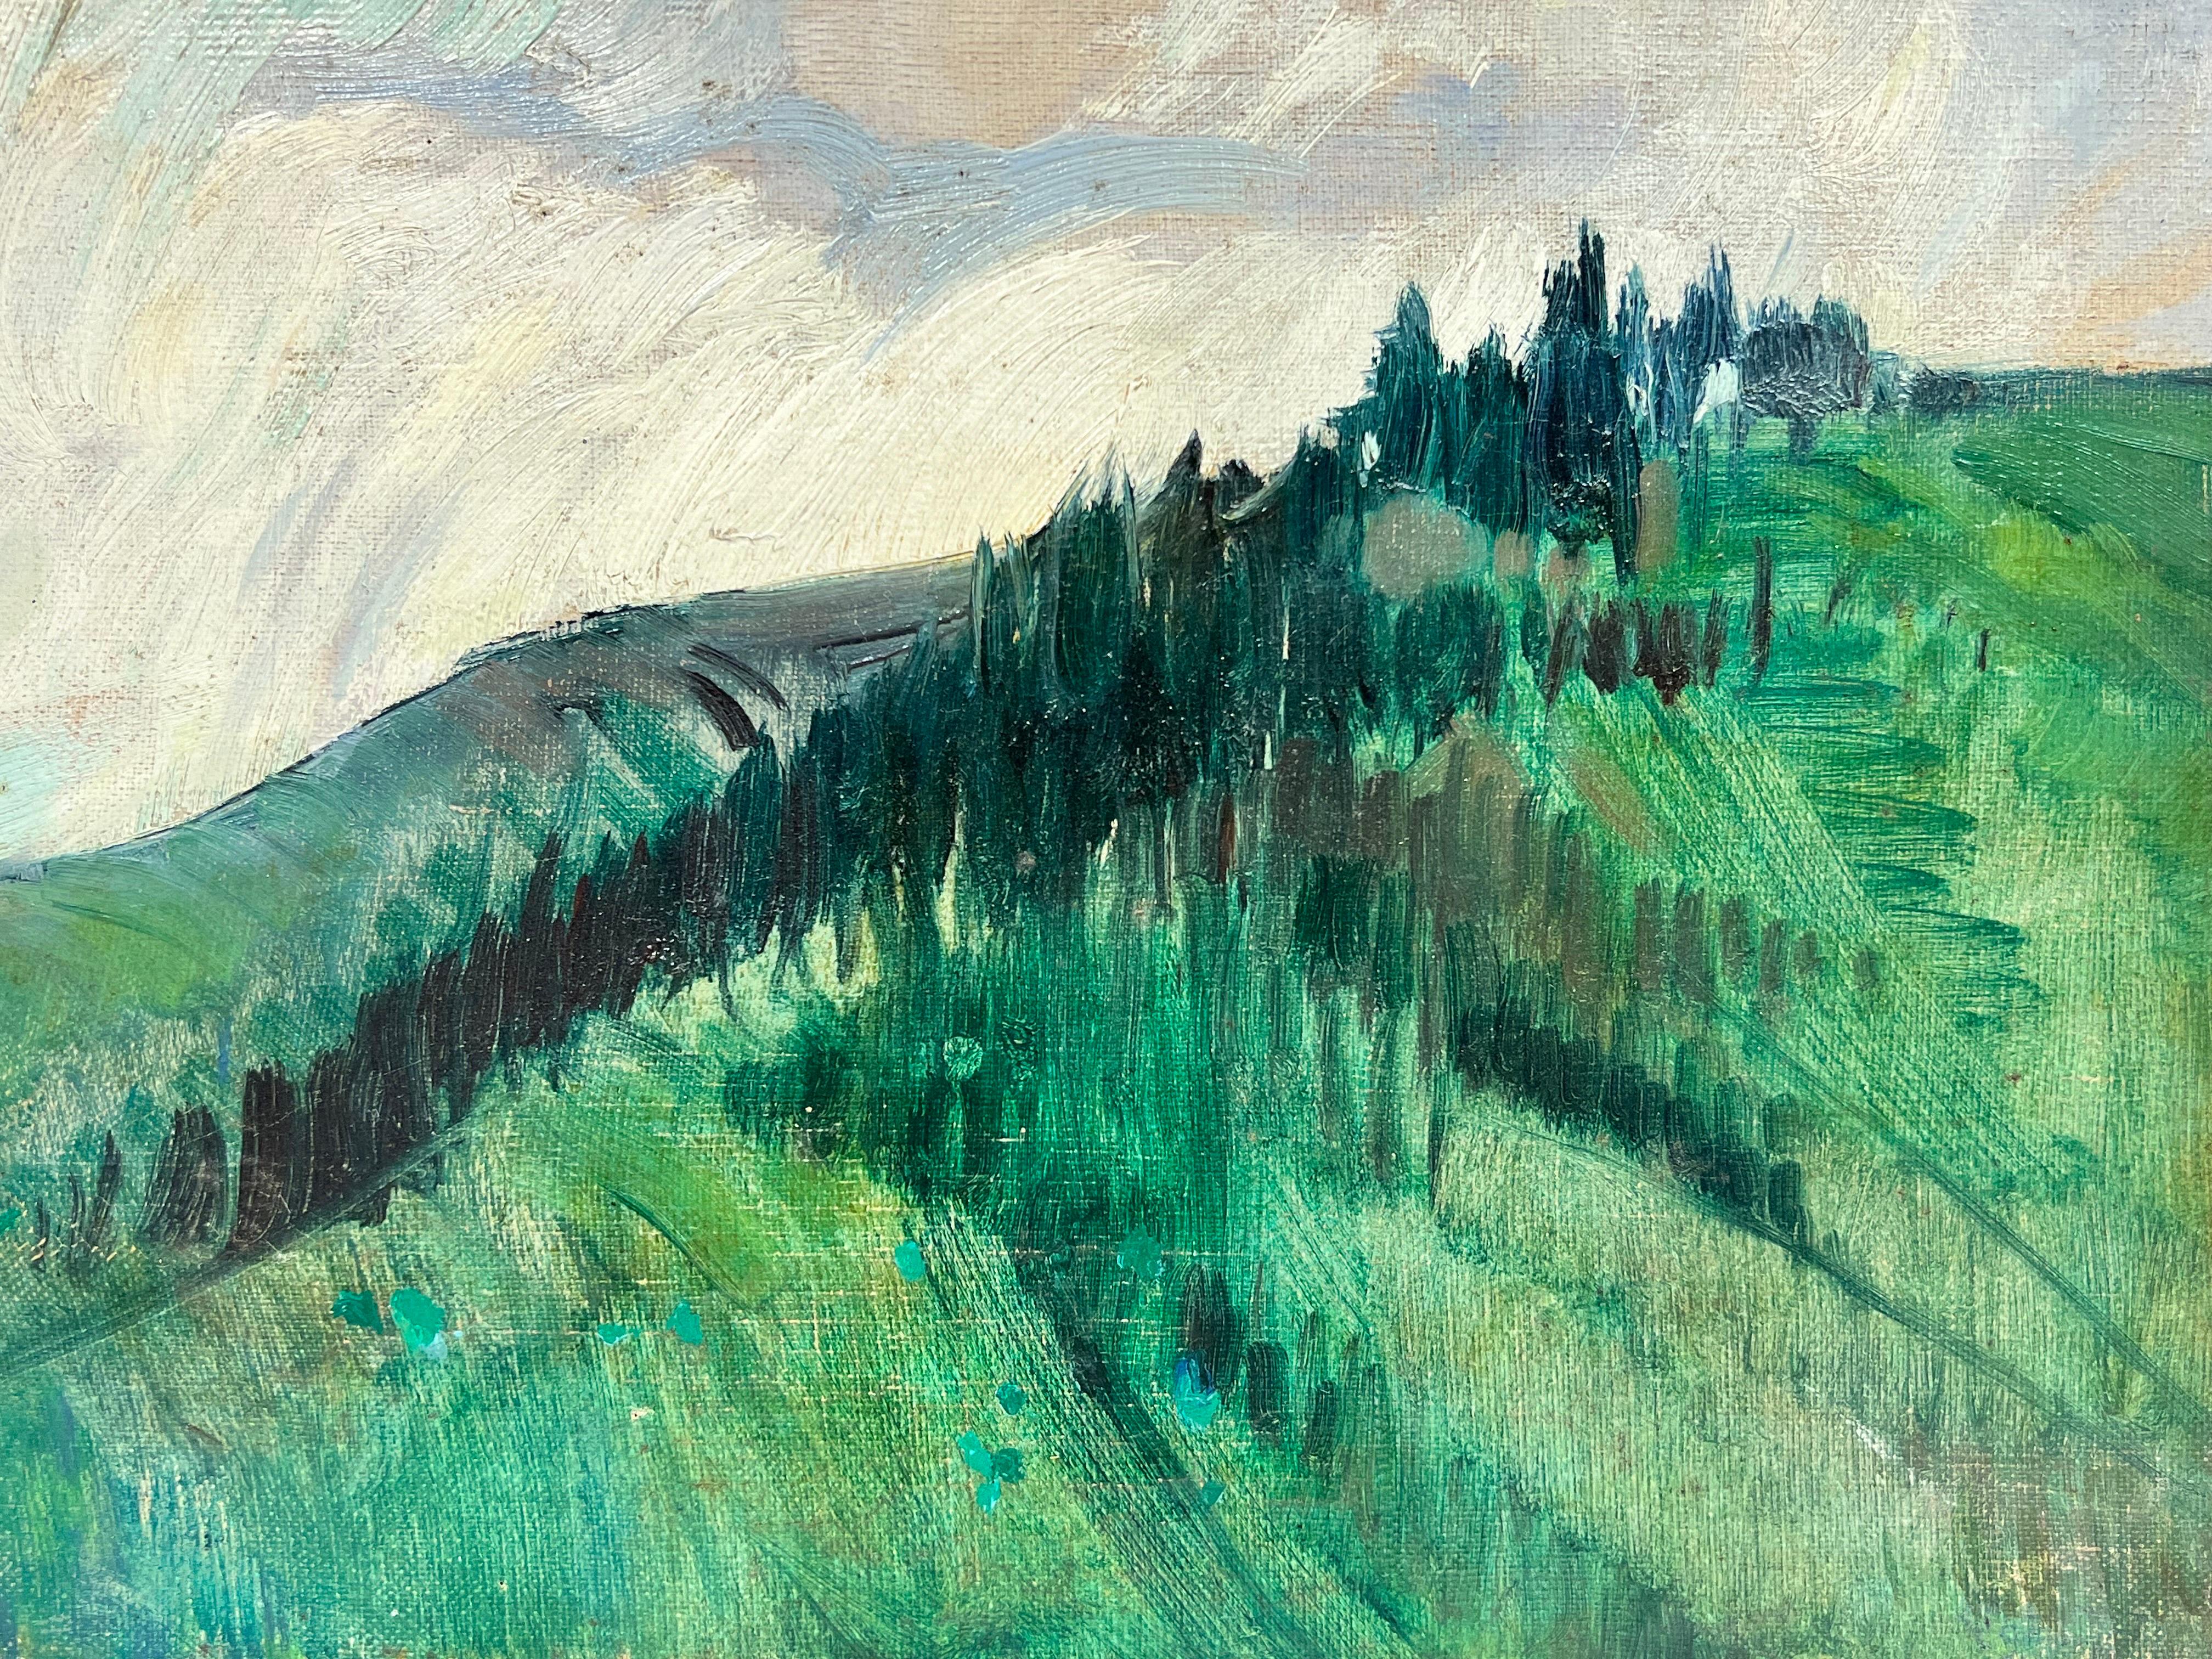 Green Landscape
French School, mid 20th century
oil painting on canvas, unframed
painting: 9.5 x 12.5 inches
condition: overall very good